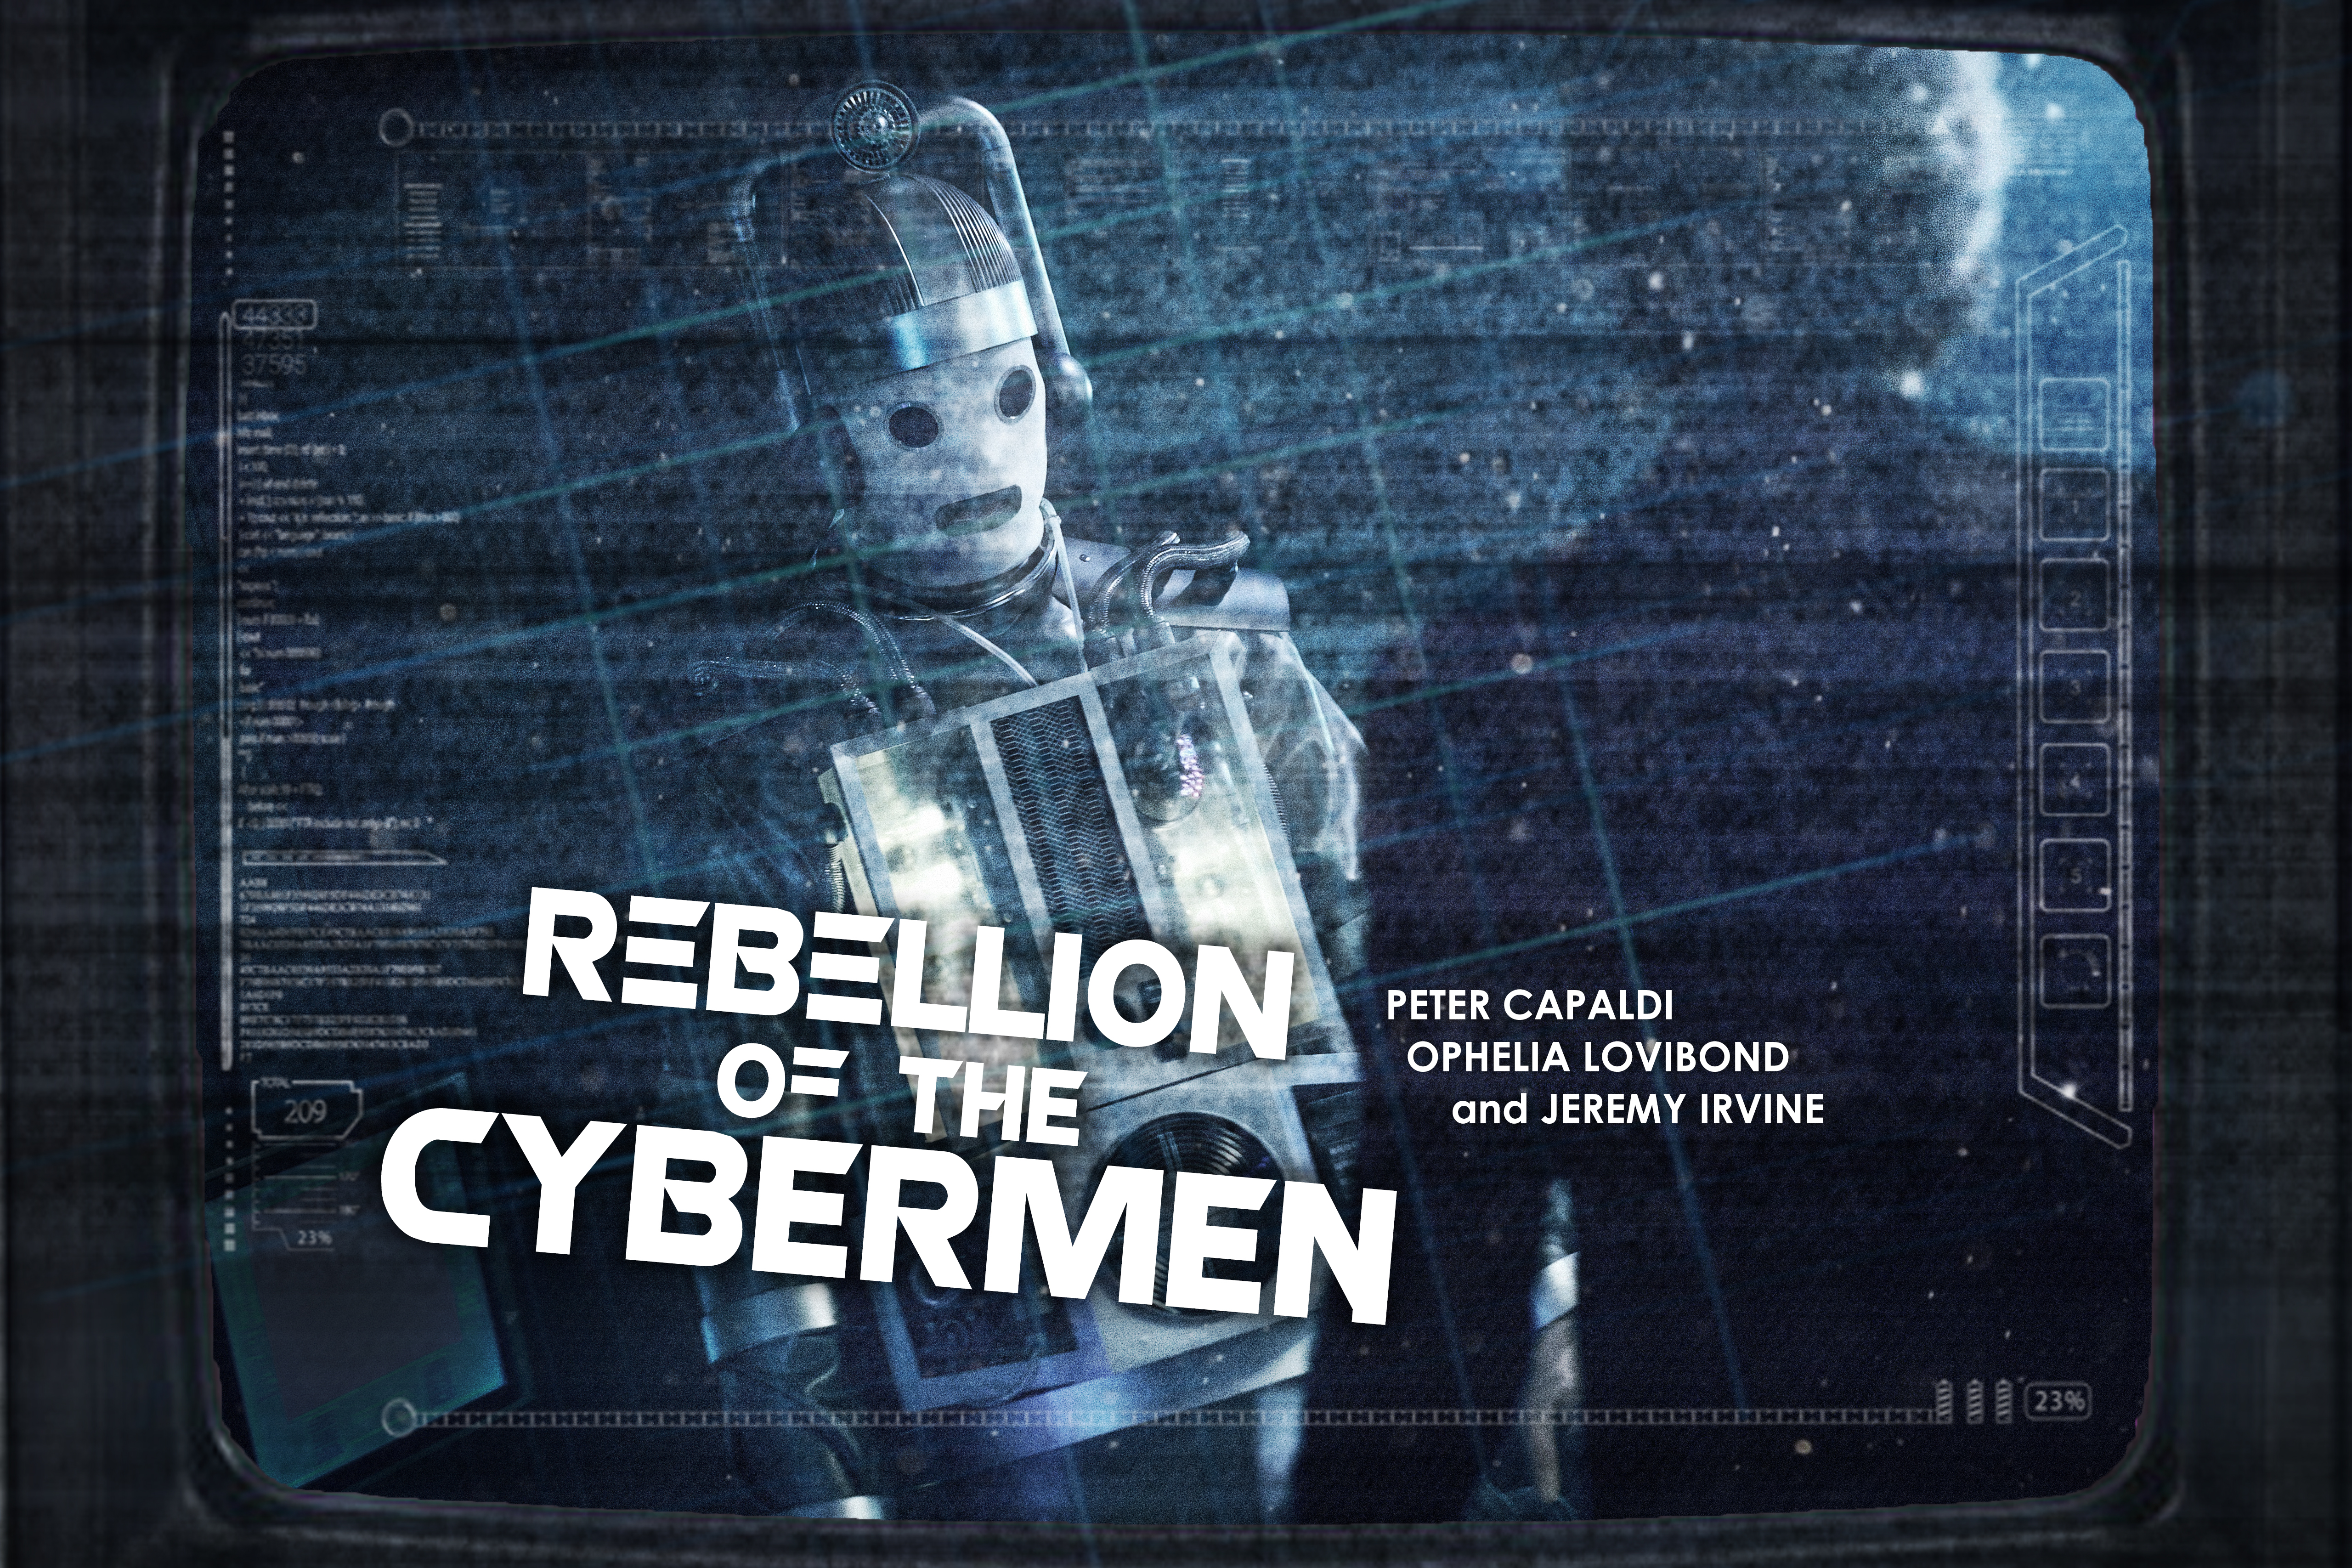 doctor_who_s10e08___rebellion_of_the_cybermen_by_swannmadeleine-dbeh7qw.jpg